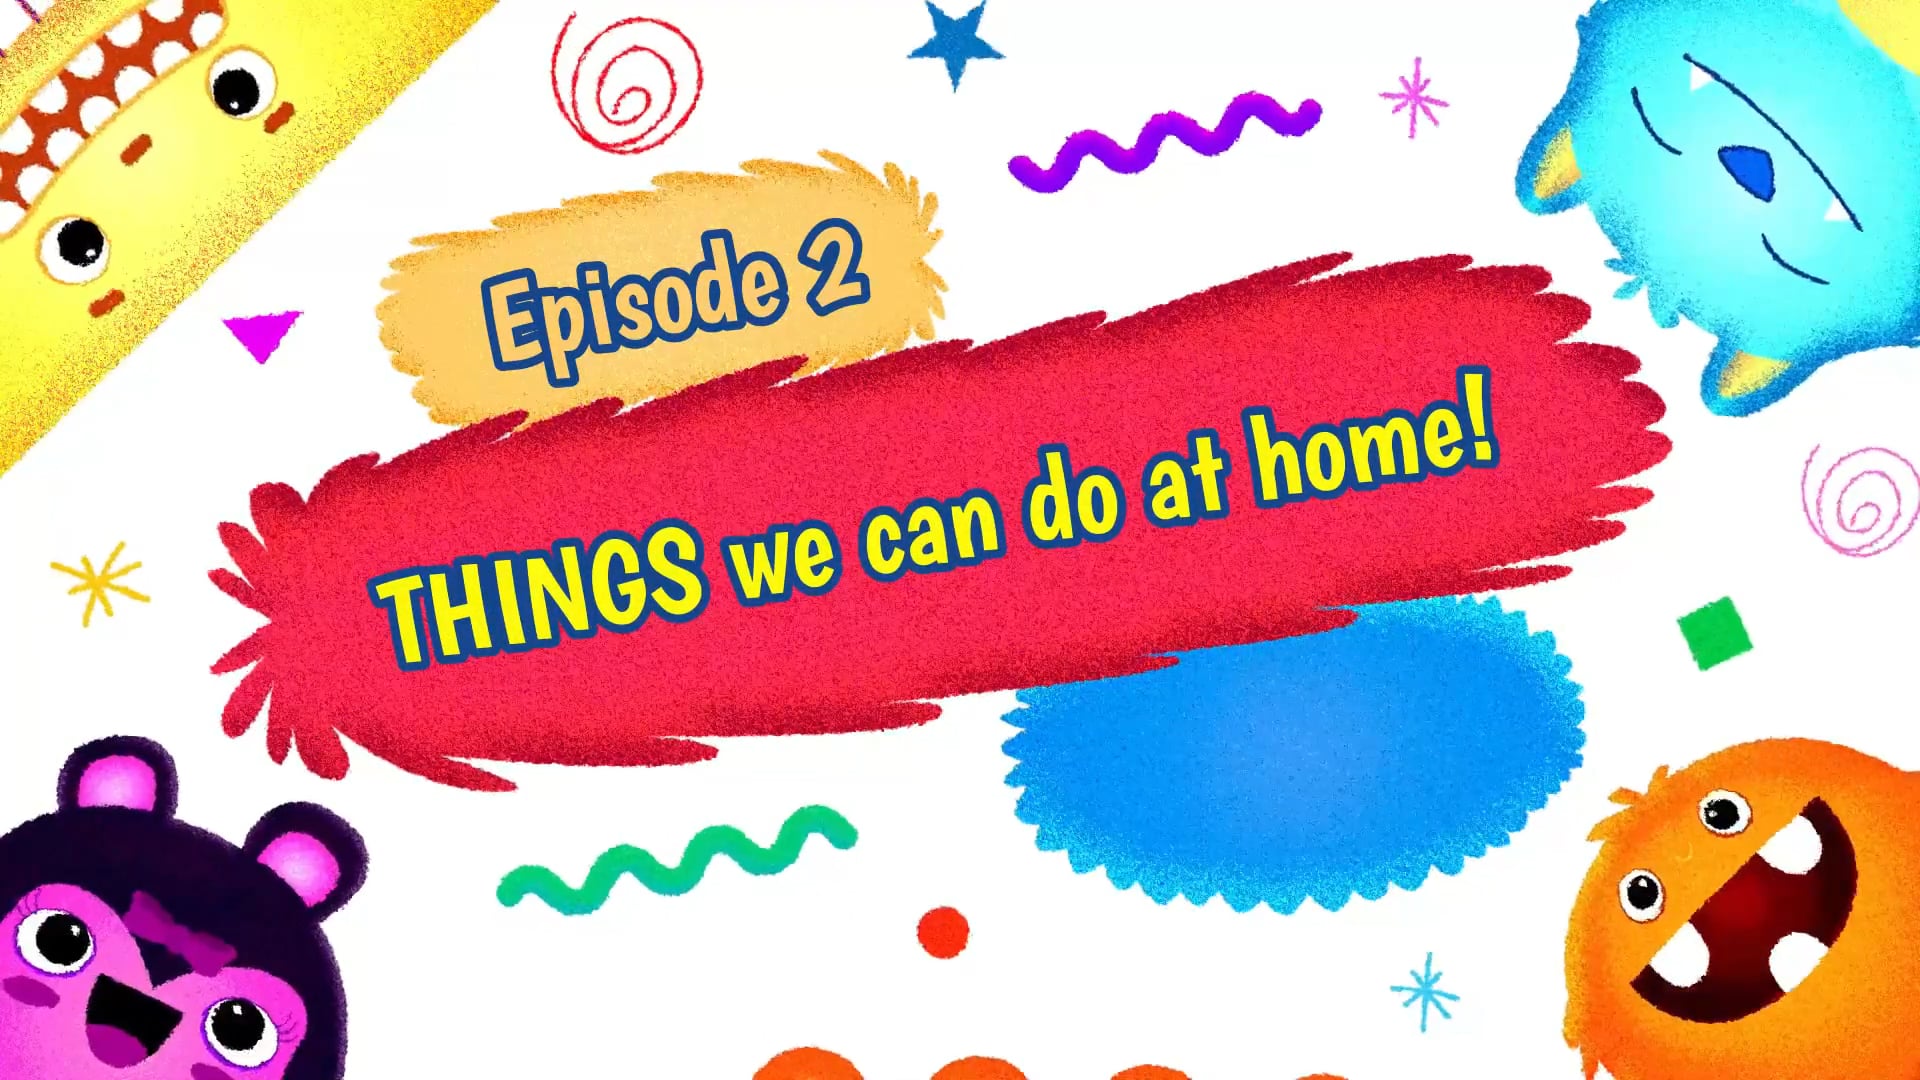 Episode 2.1 (For 18 months to 3 year olds) - Things we can do at home!